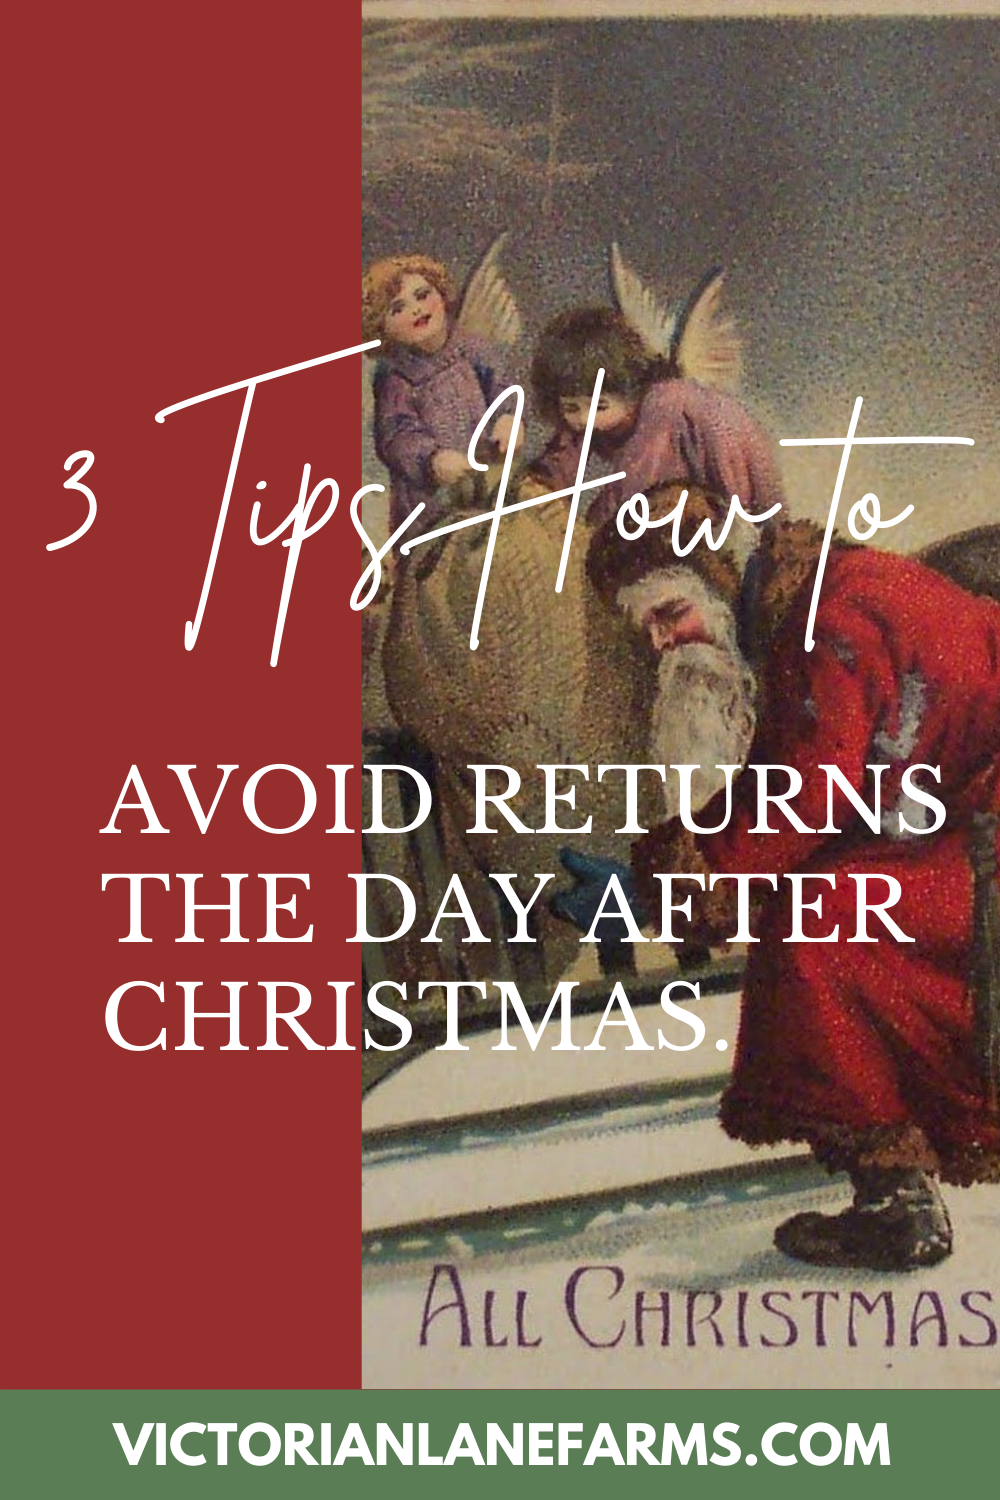 3 tips how to avoid returns after Christmas | Includes gift ideas.